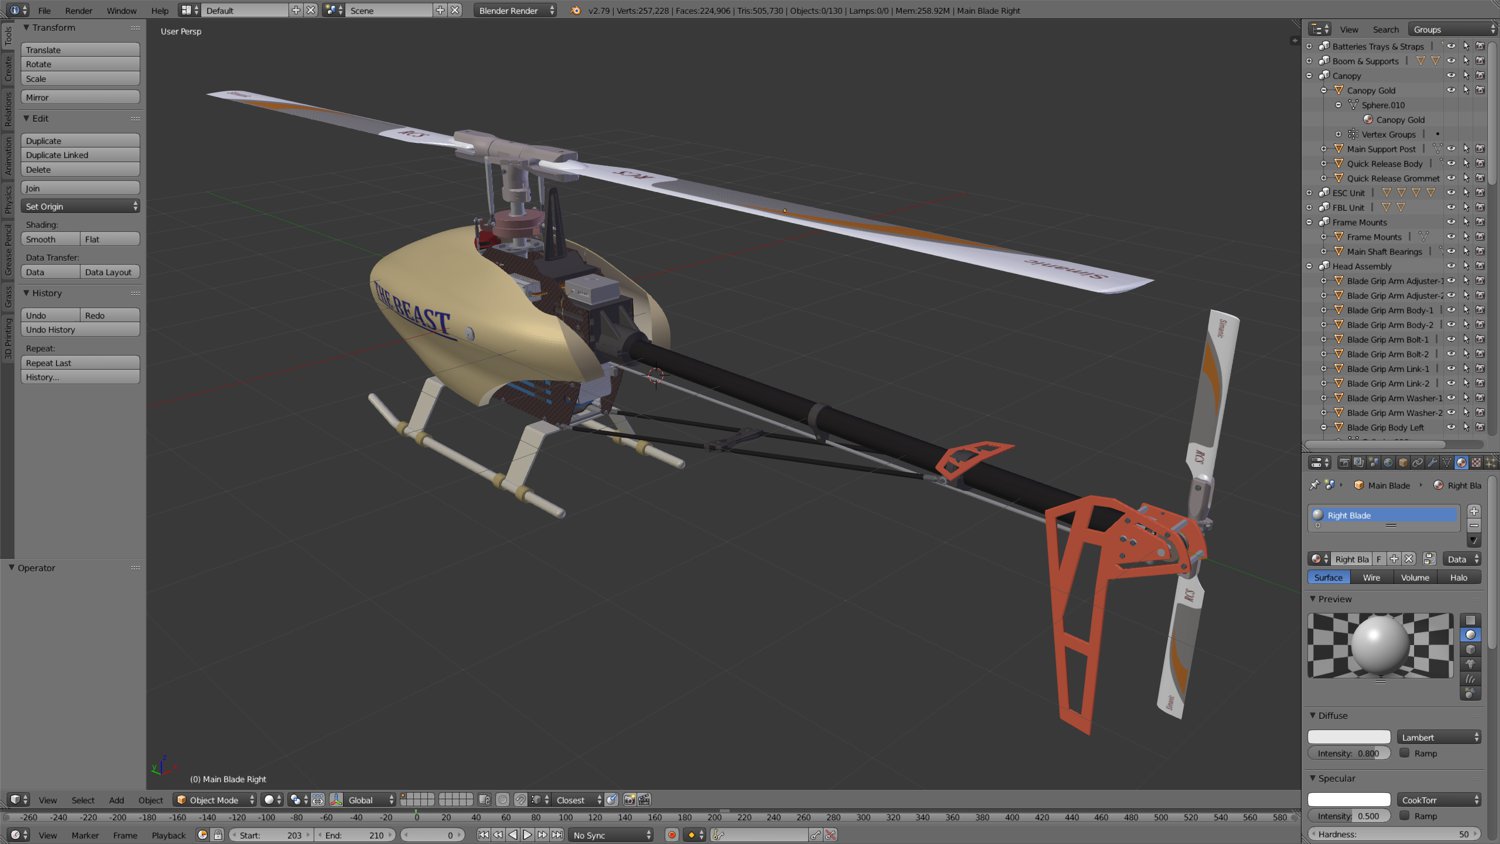 Screenshot of radio control helicopter via Blender's 2.79 user interface - Rear side view with canopy on.